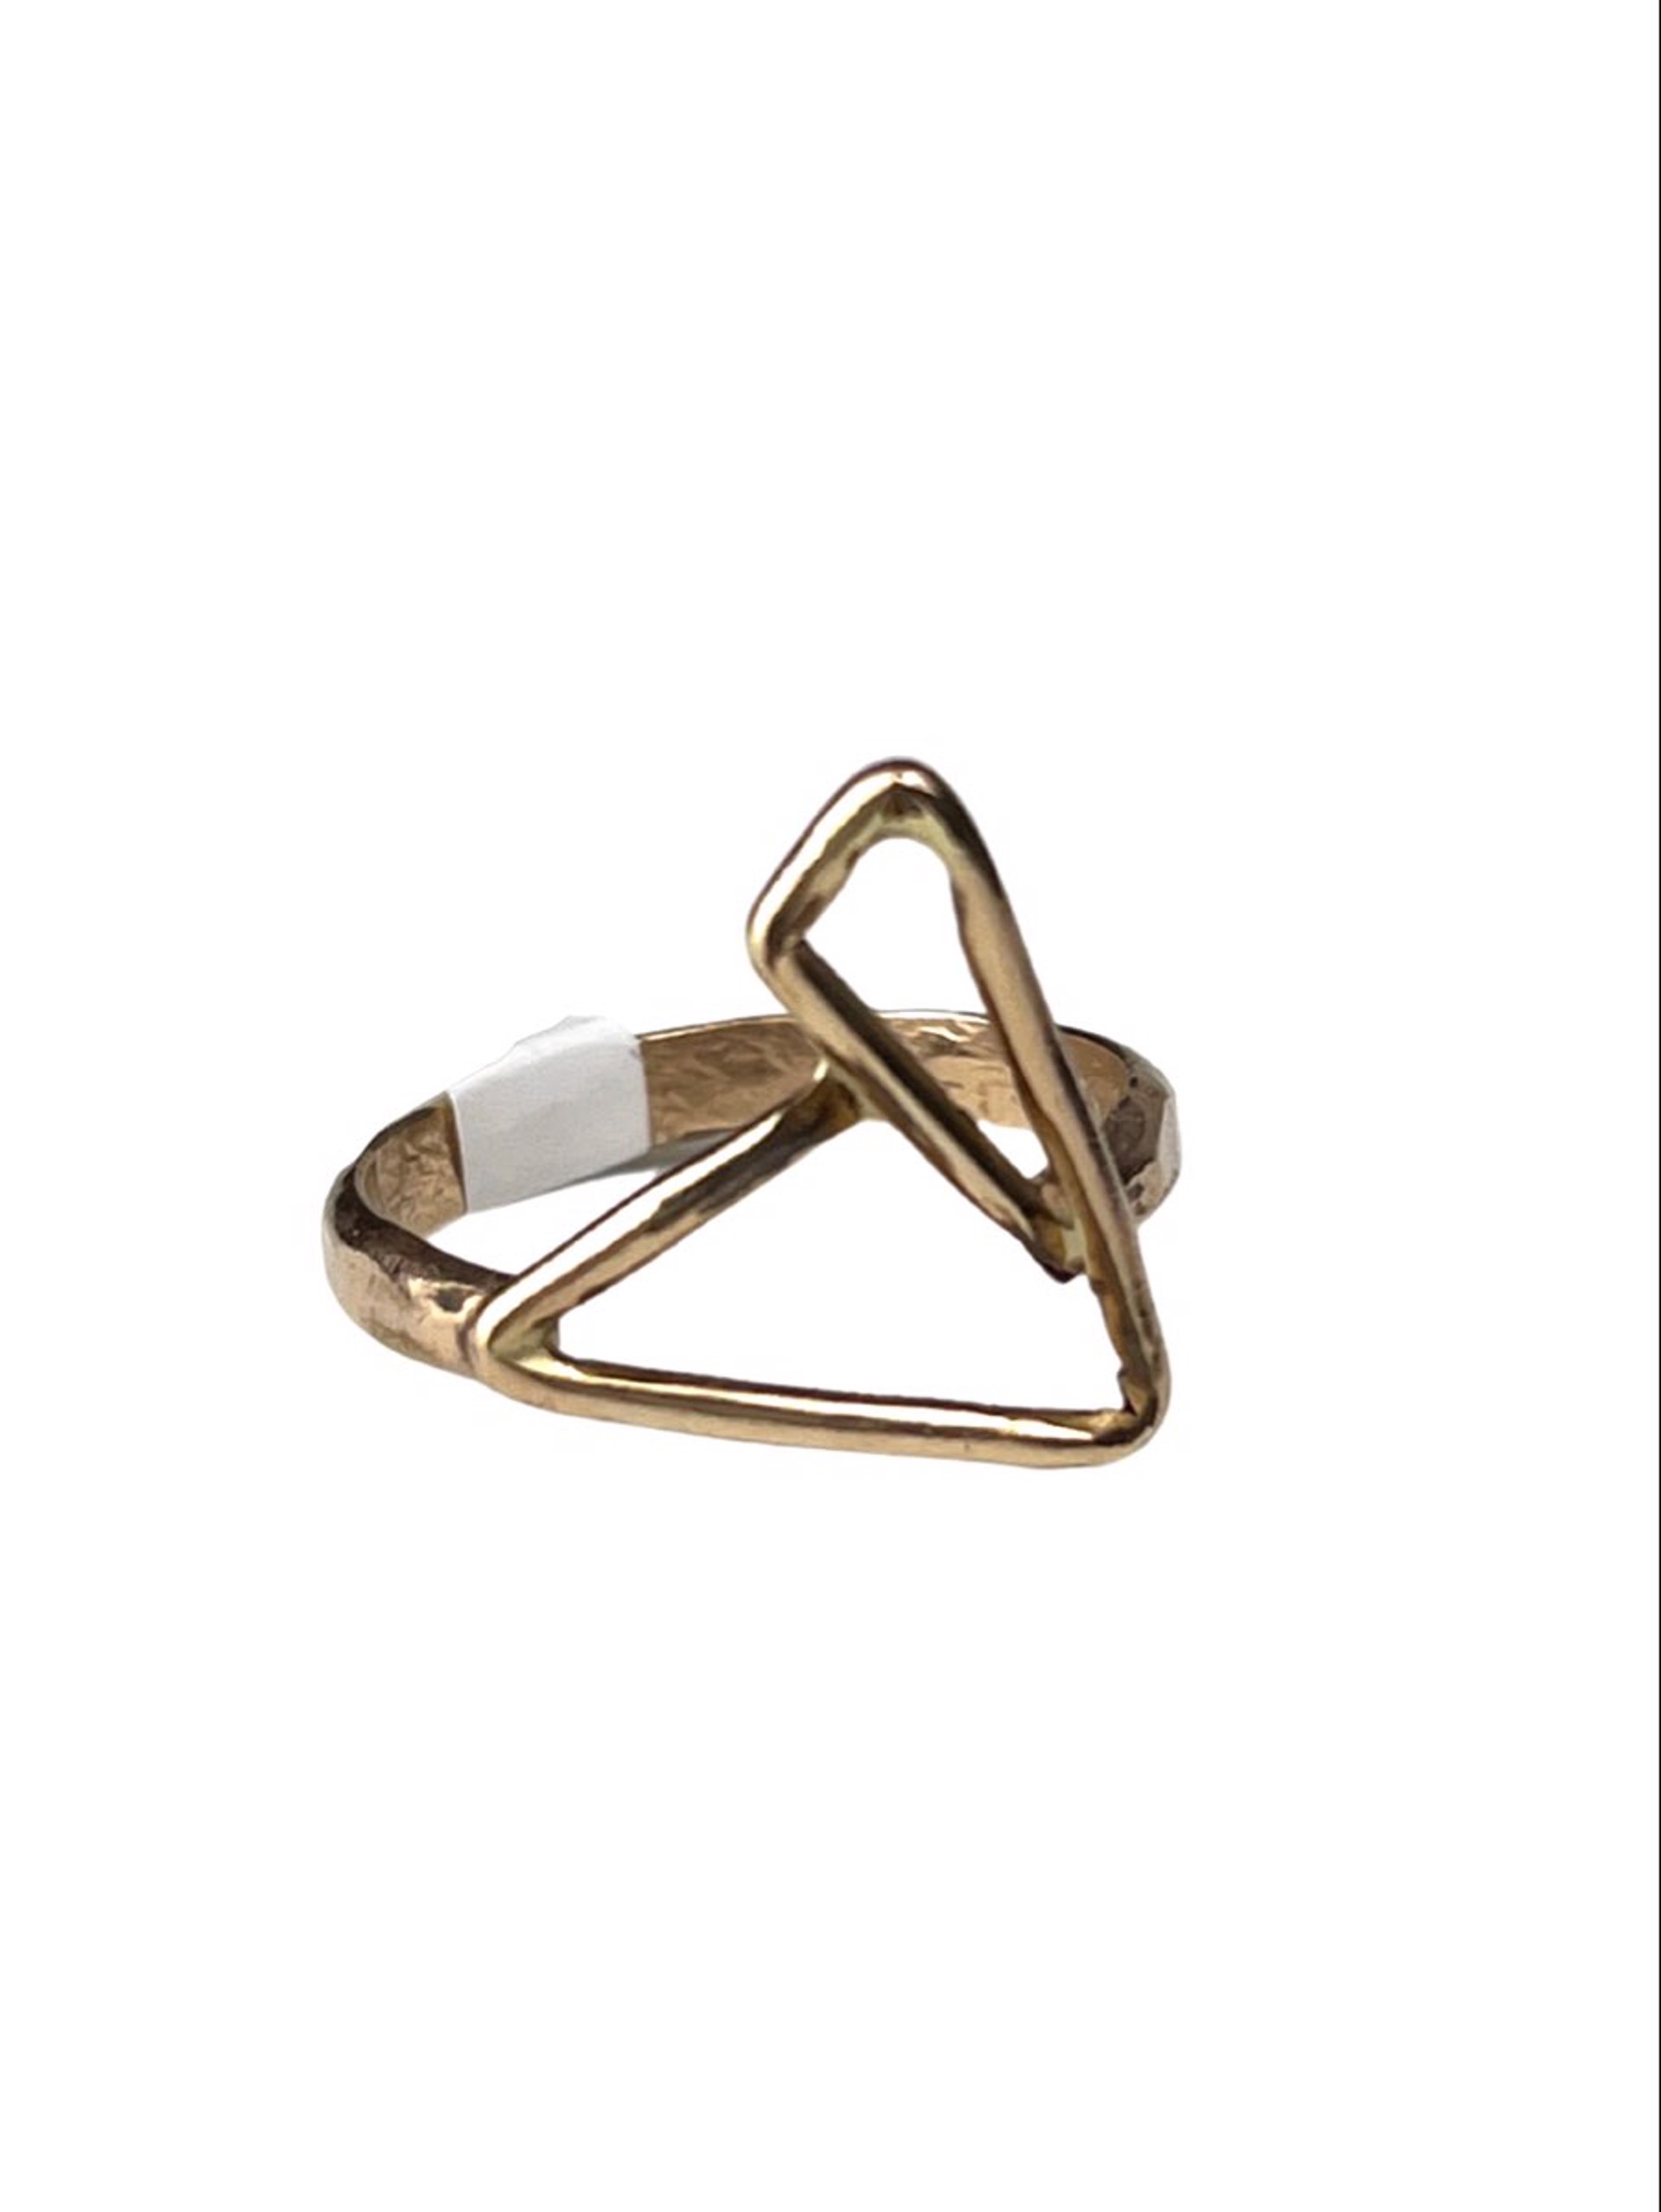 Gold Fill Ring by Nola Smodic